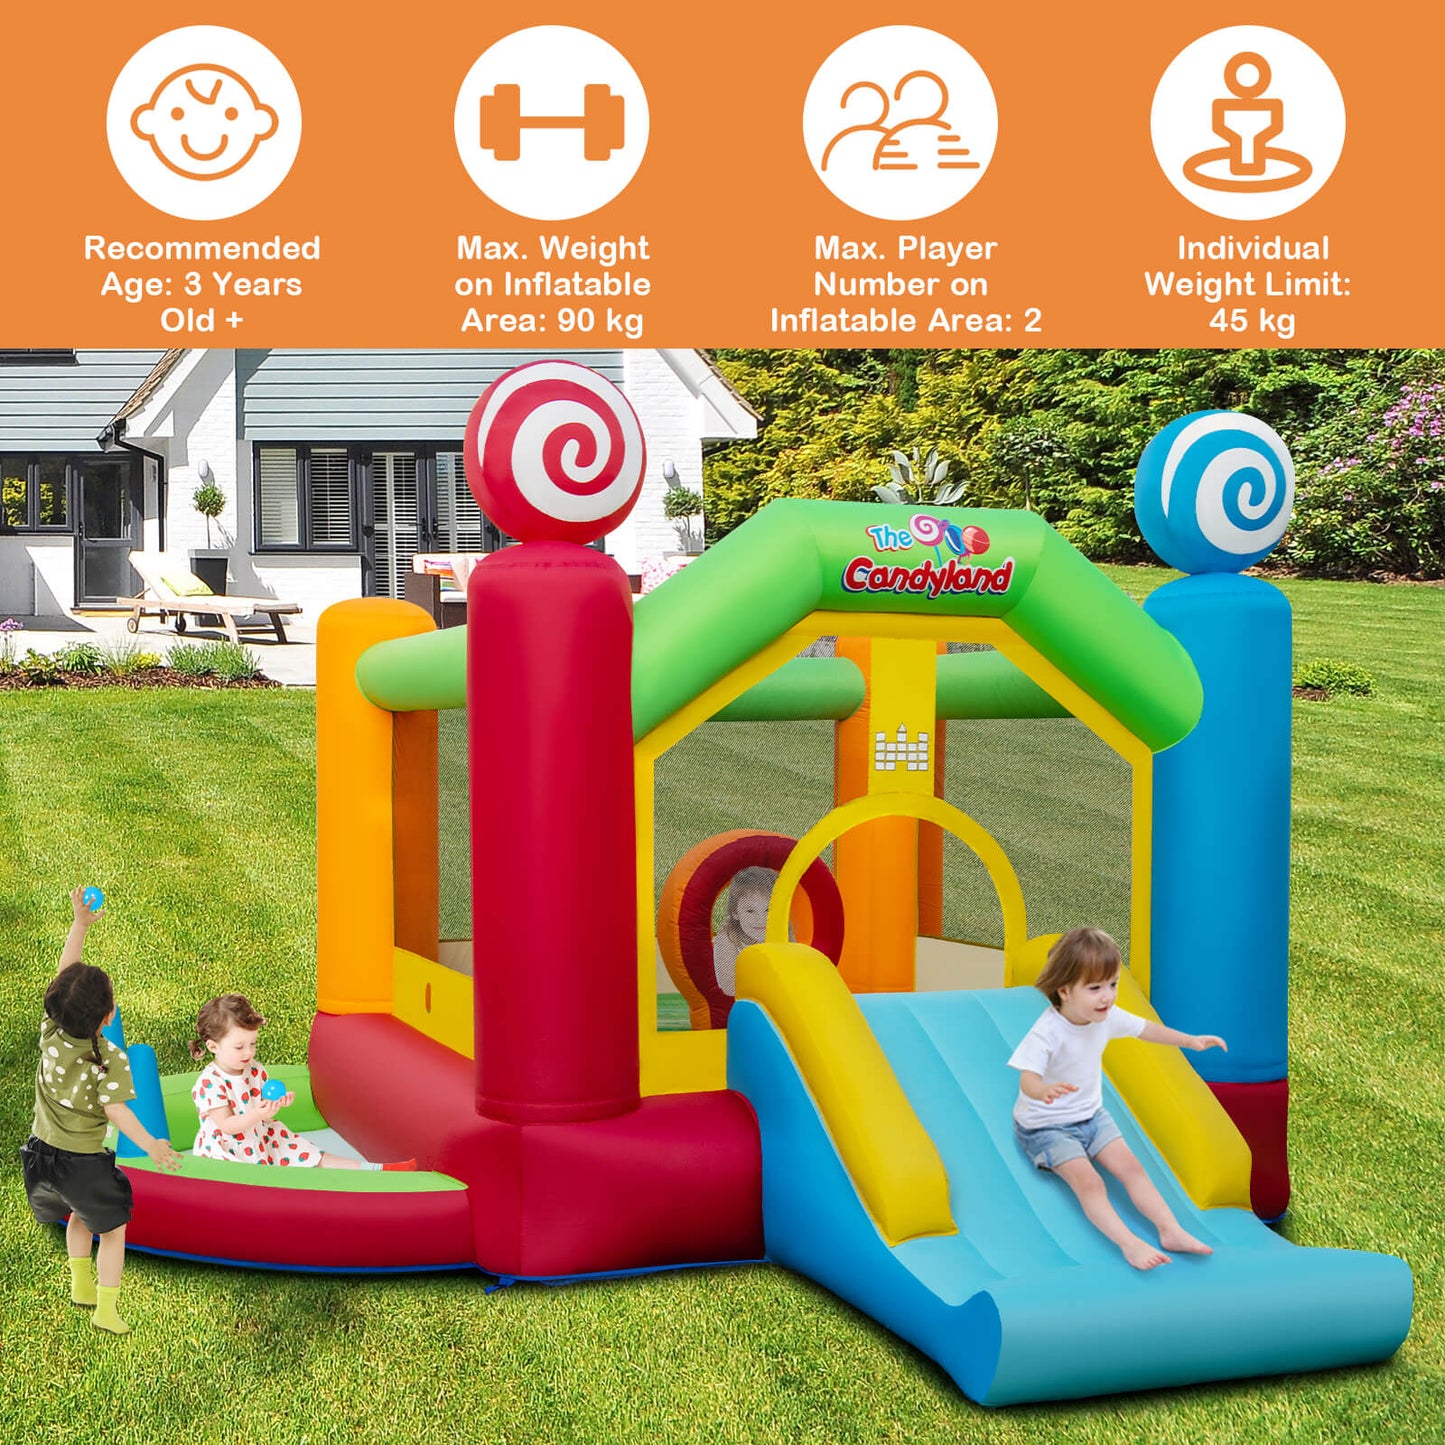 Sweet Candy Land Inflatable Bouncy Castle with Slide and 680W Blower